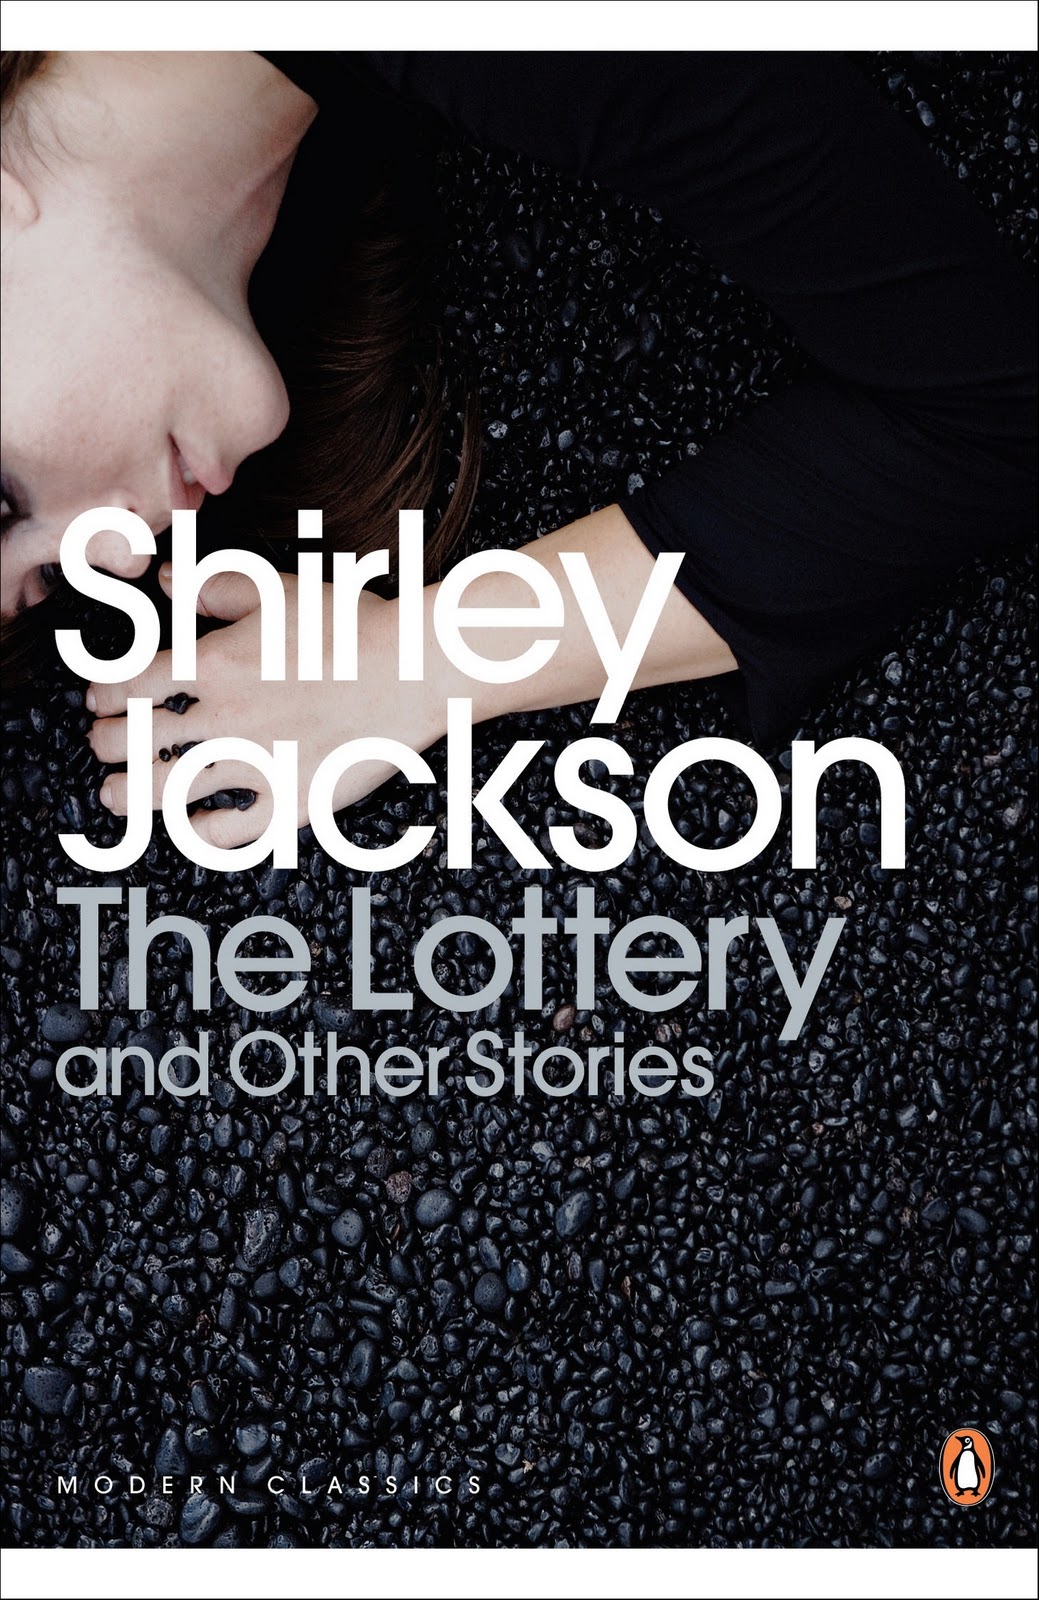 essay for the lottery by shirley jackson